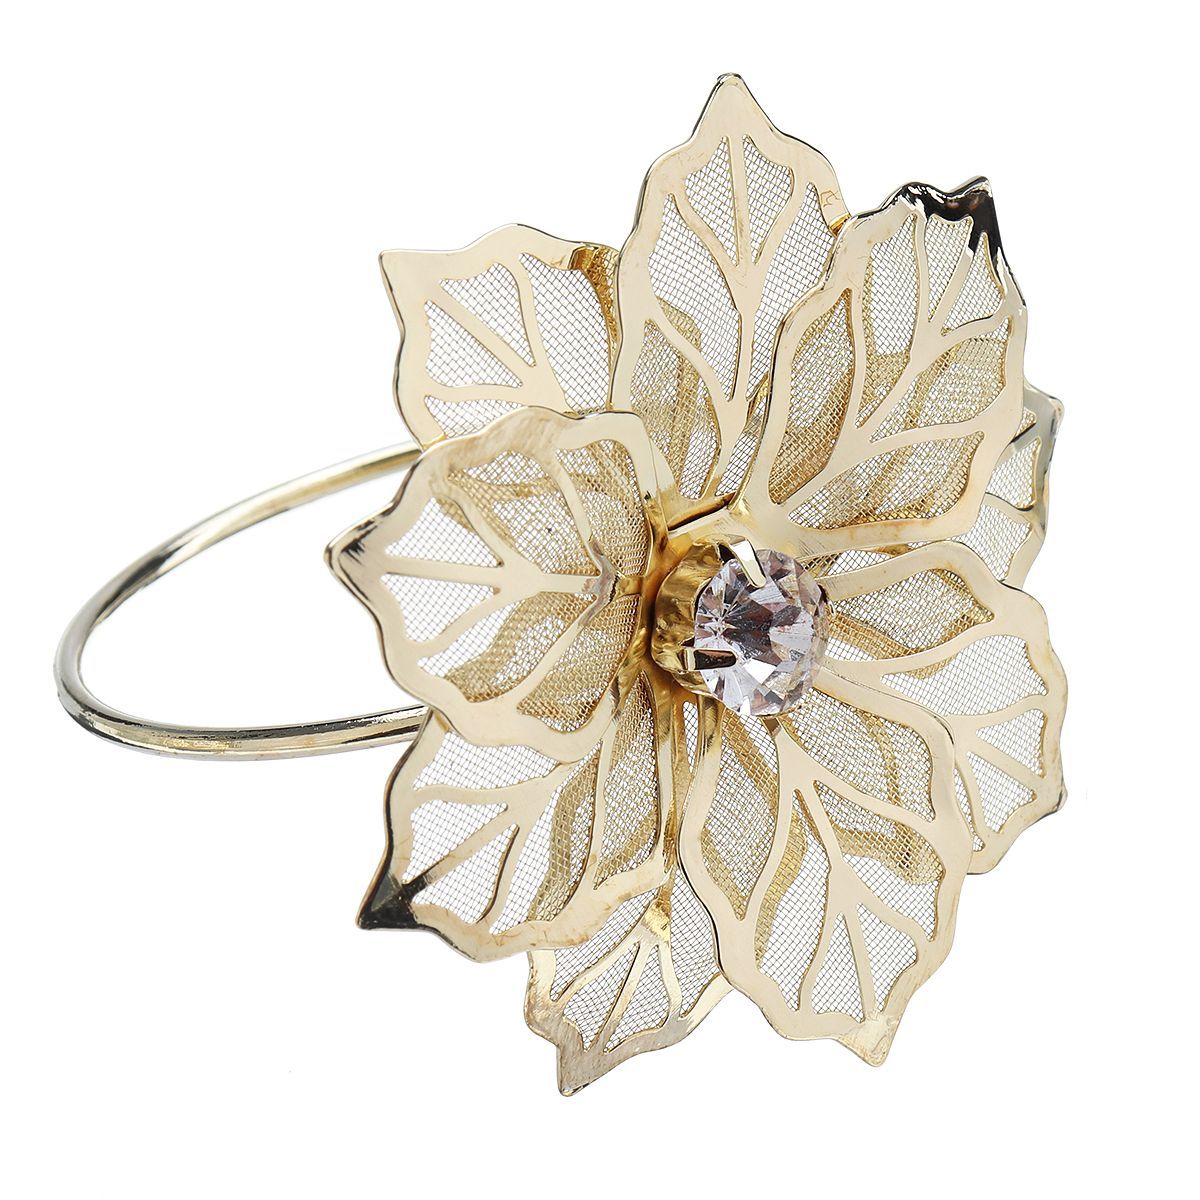 12Pcs-Floral-Alloy-Rings-Napkin-Holder-Dinner-Wedding-Towel-Ring-Party-Table-Decor-Supplies-1518229